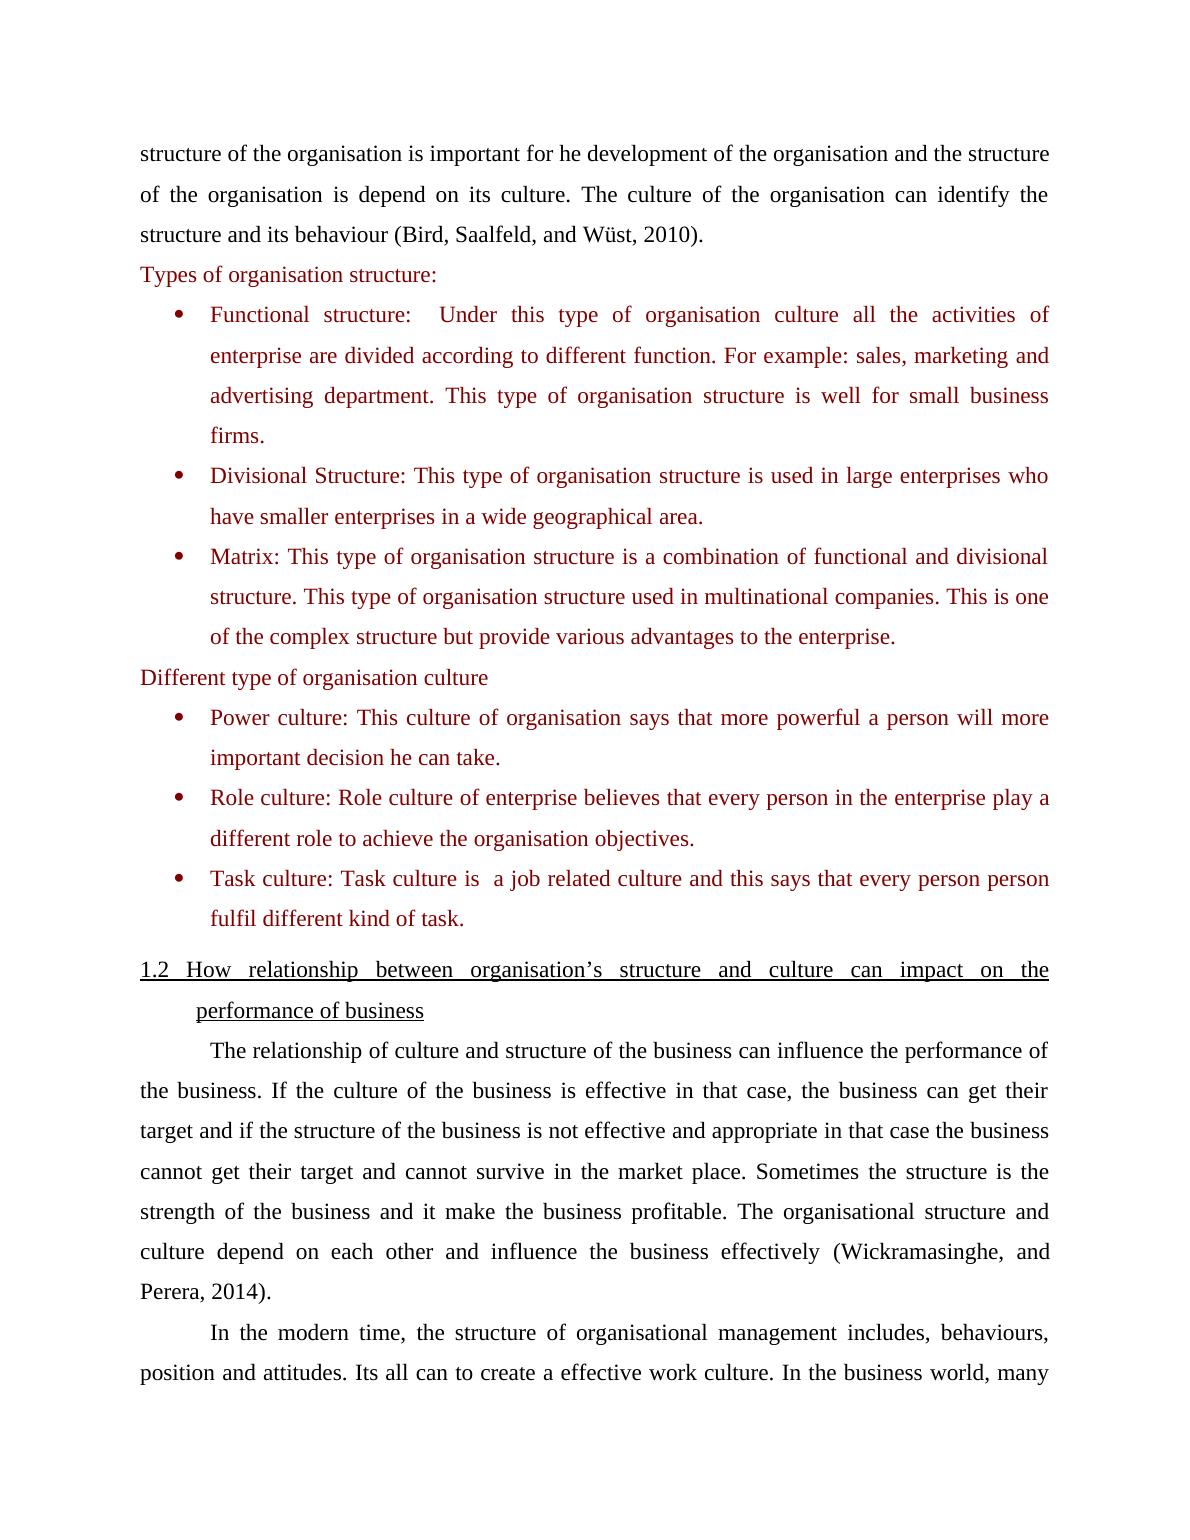 Organisation and Behaviour of the City College and Enterprise rent-a-car : Report_4